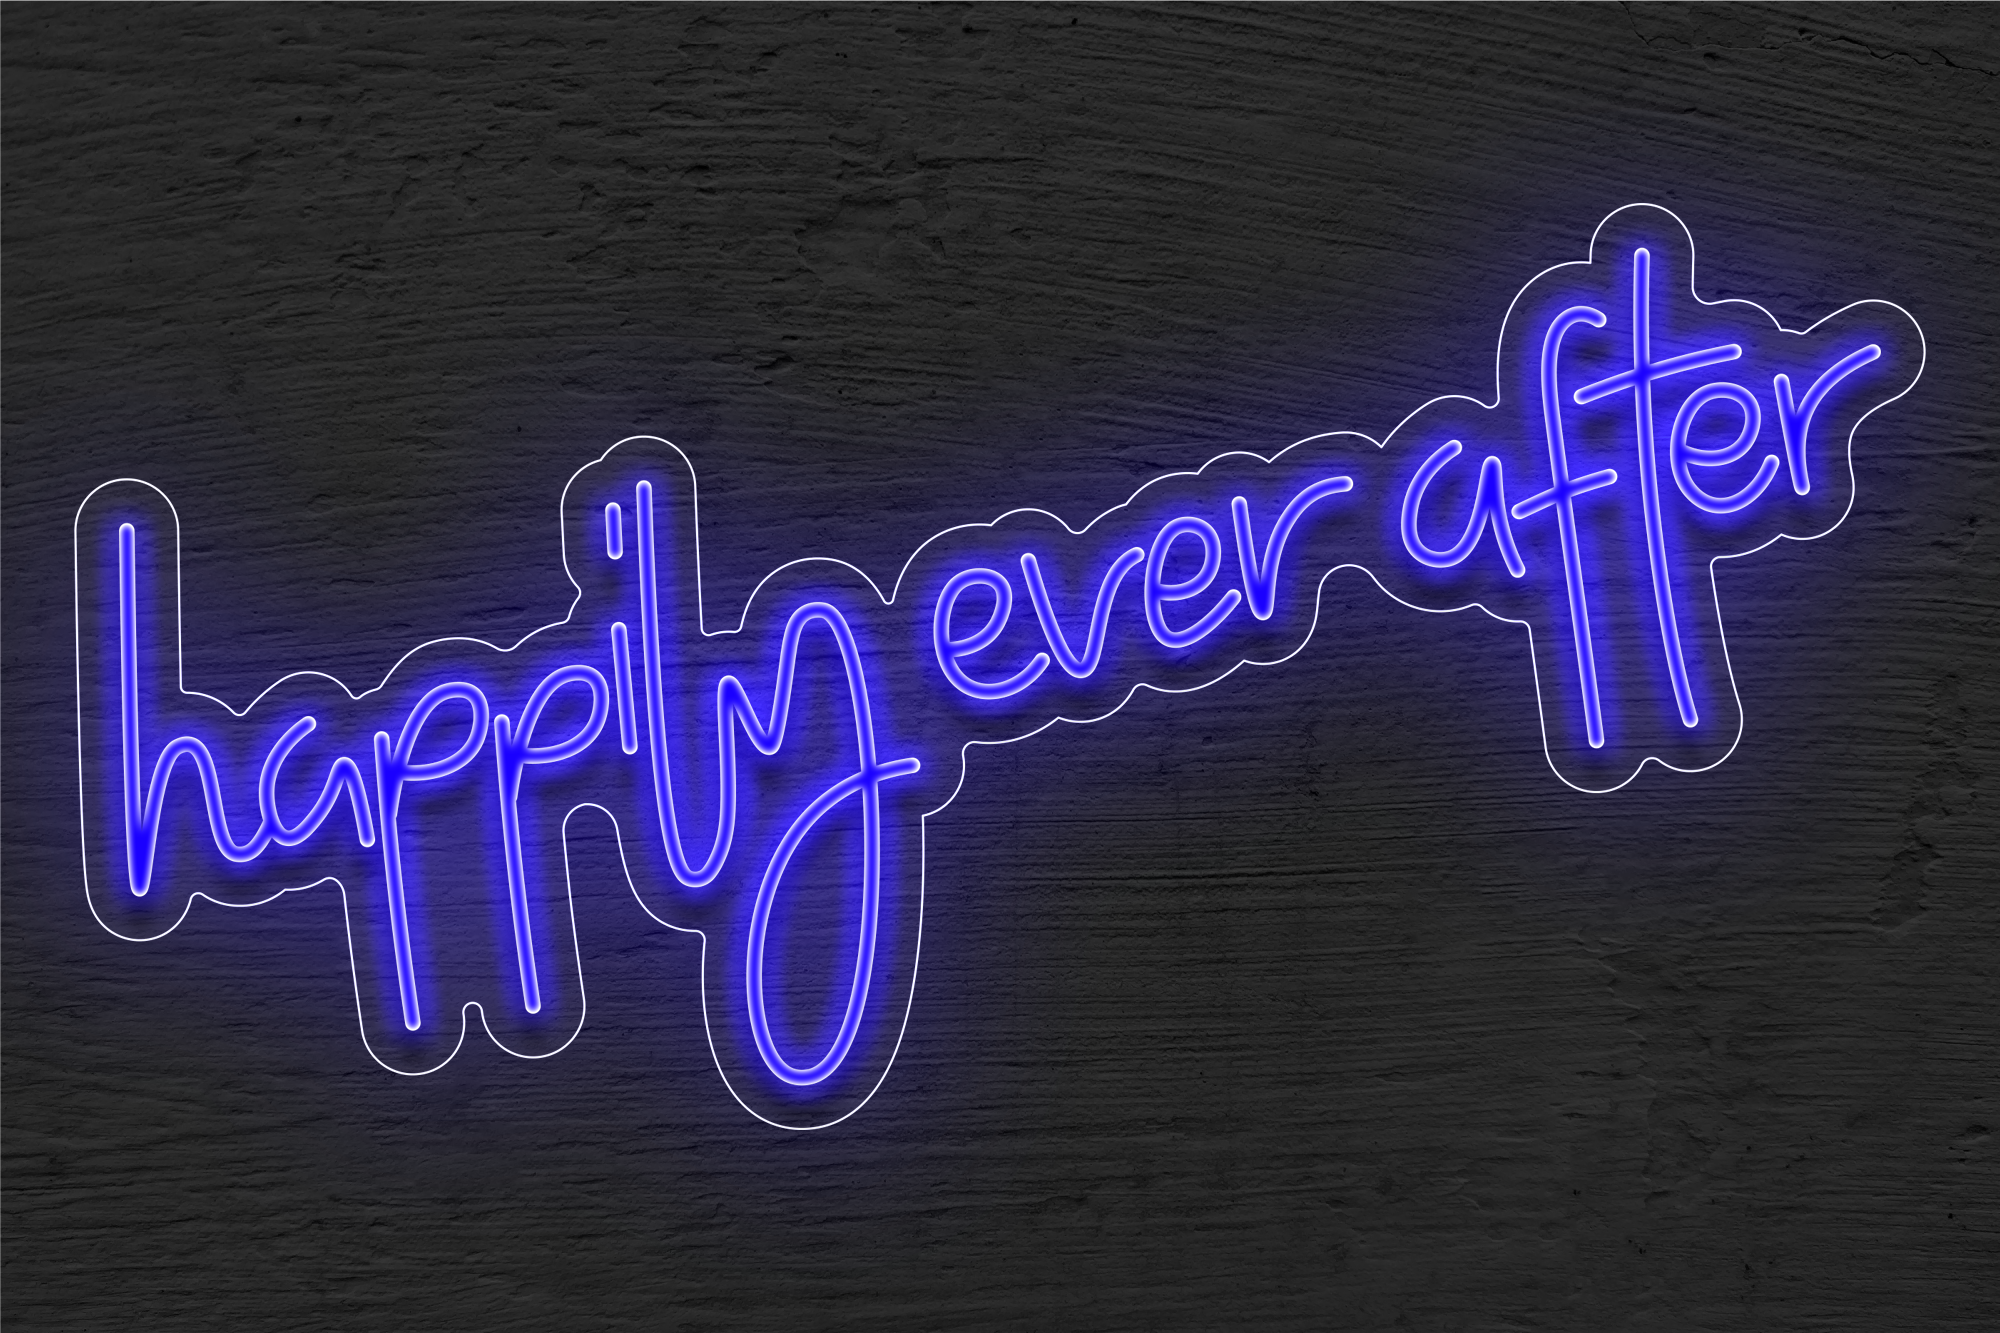 "Happily ever after" LED Neon Sign